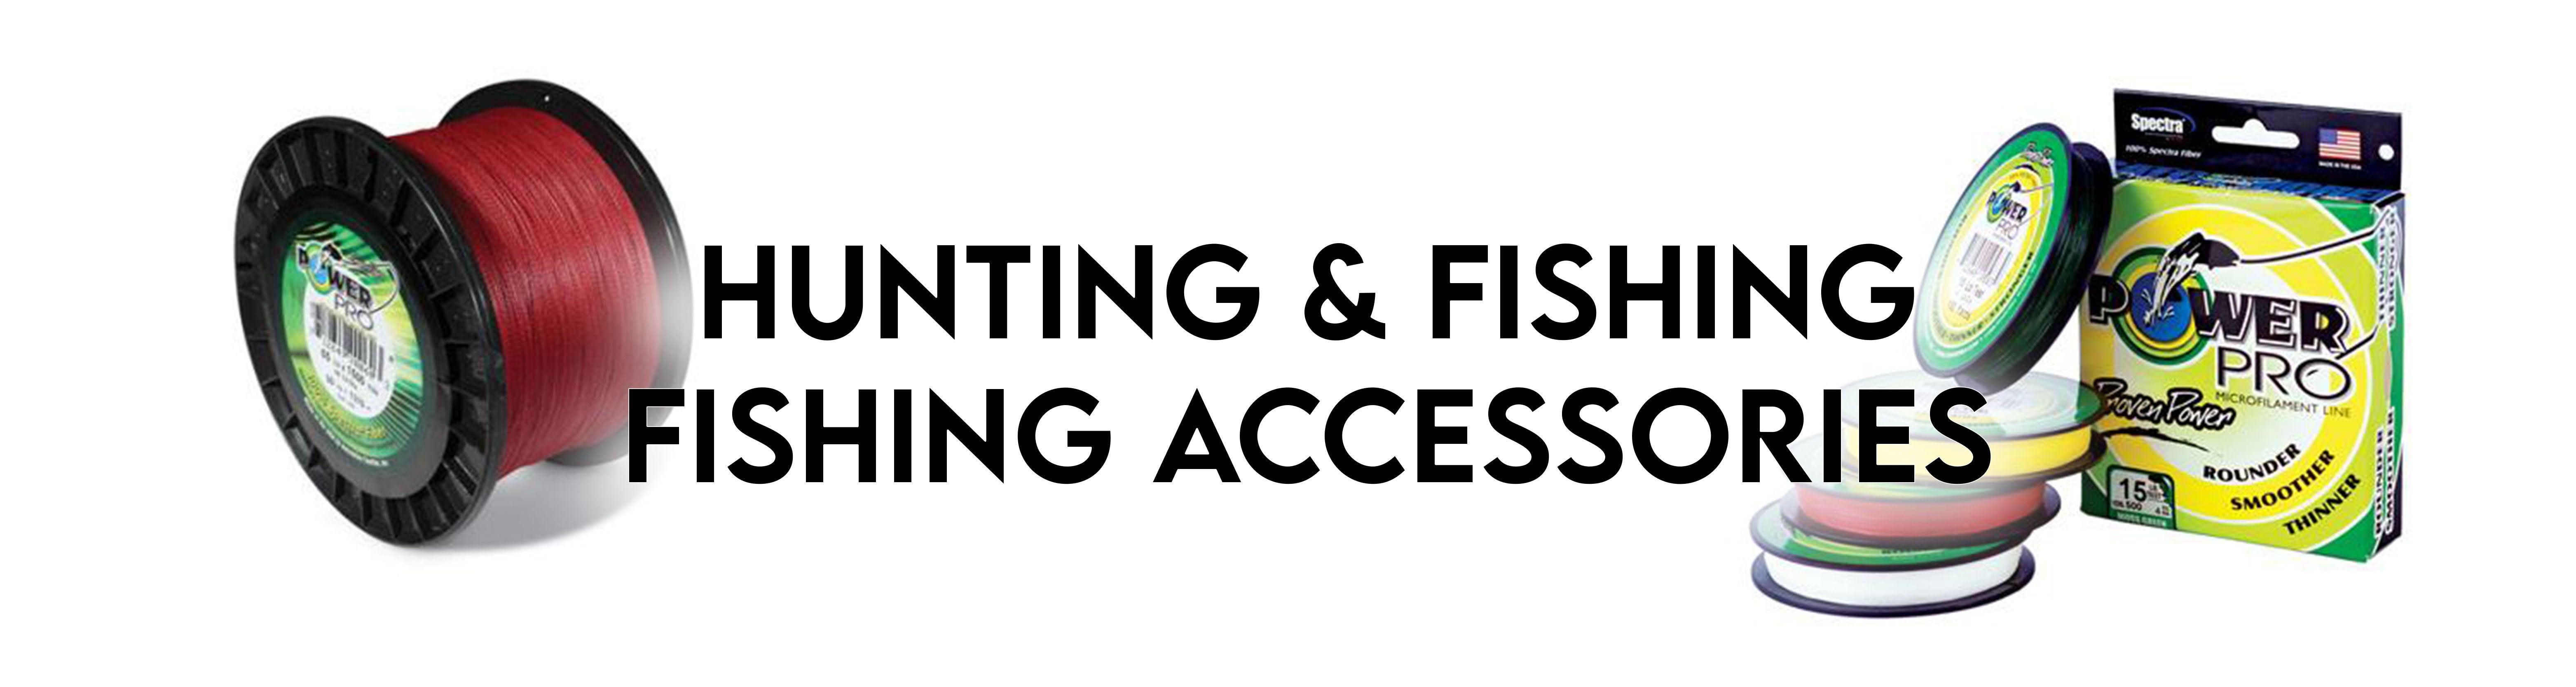 Hunting & Fishing - Fishing Accessories – Page 4 – Recreation